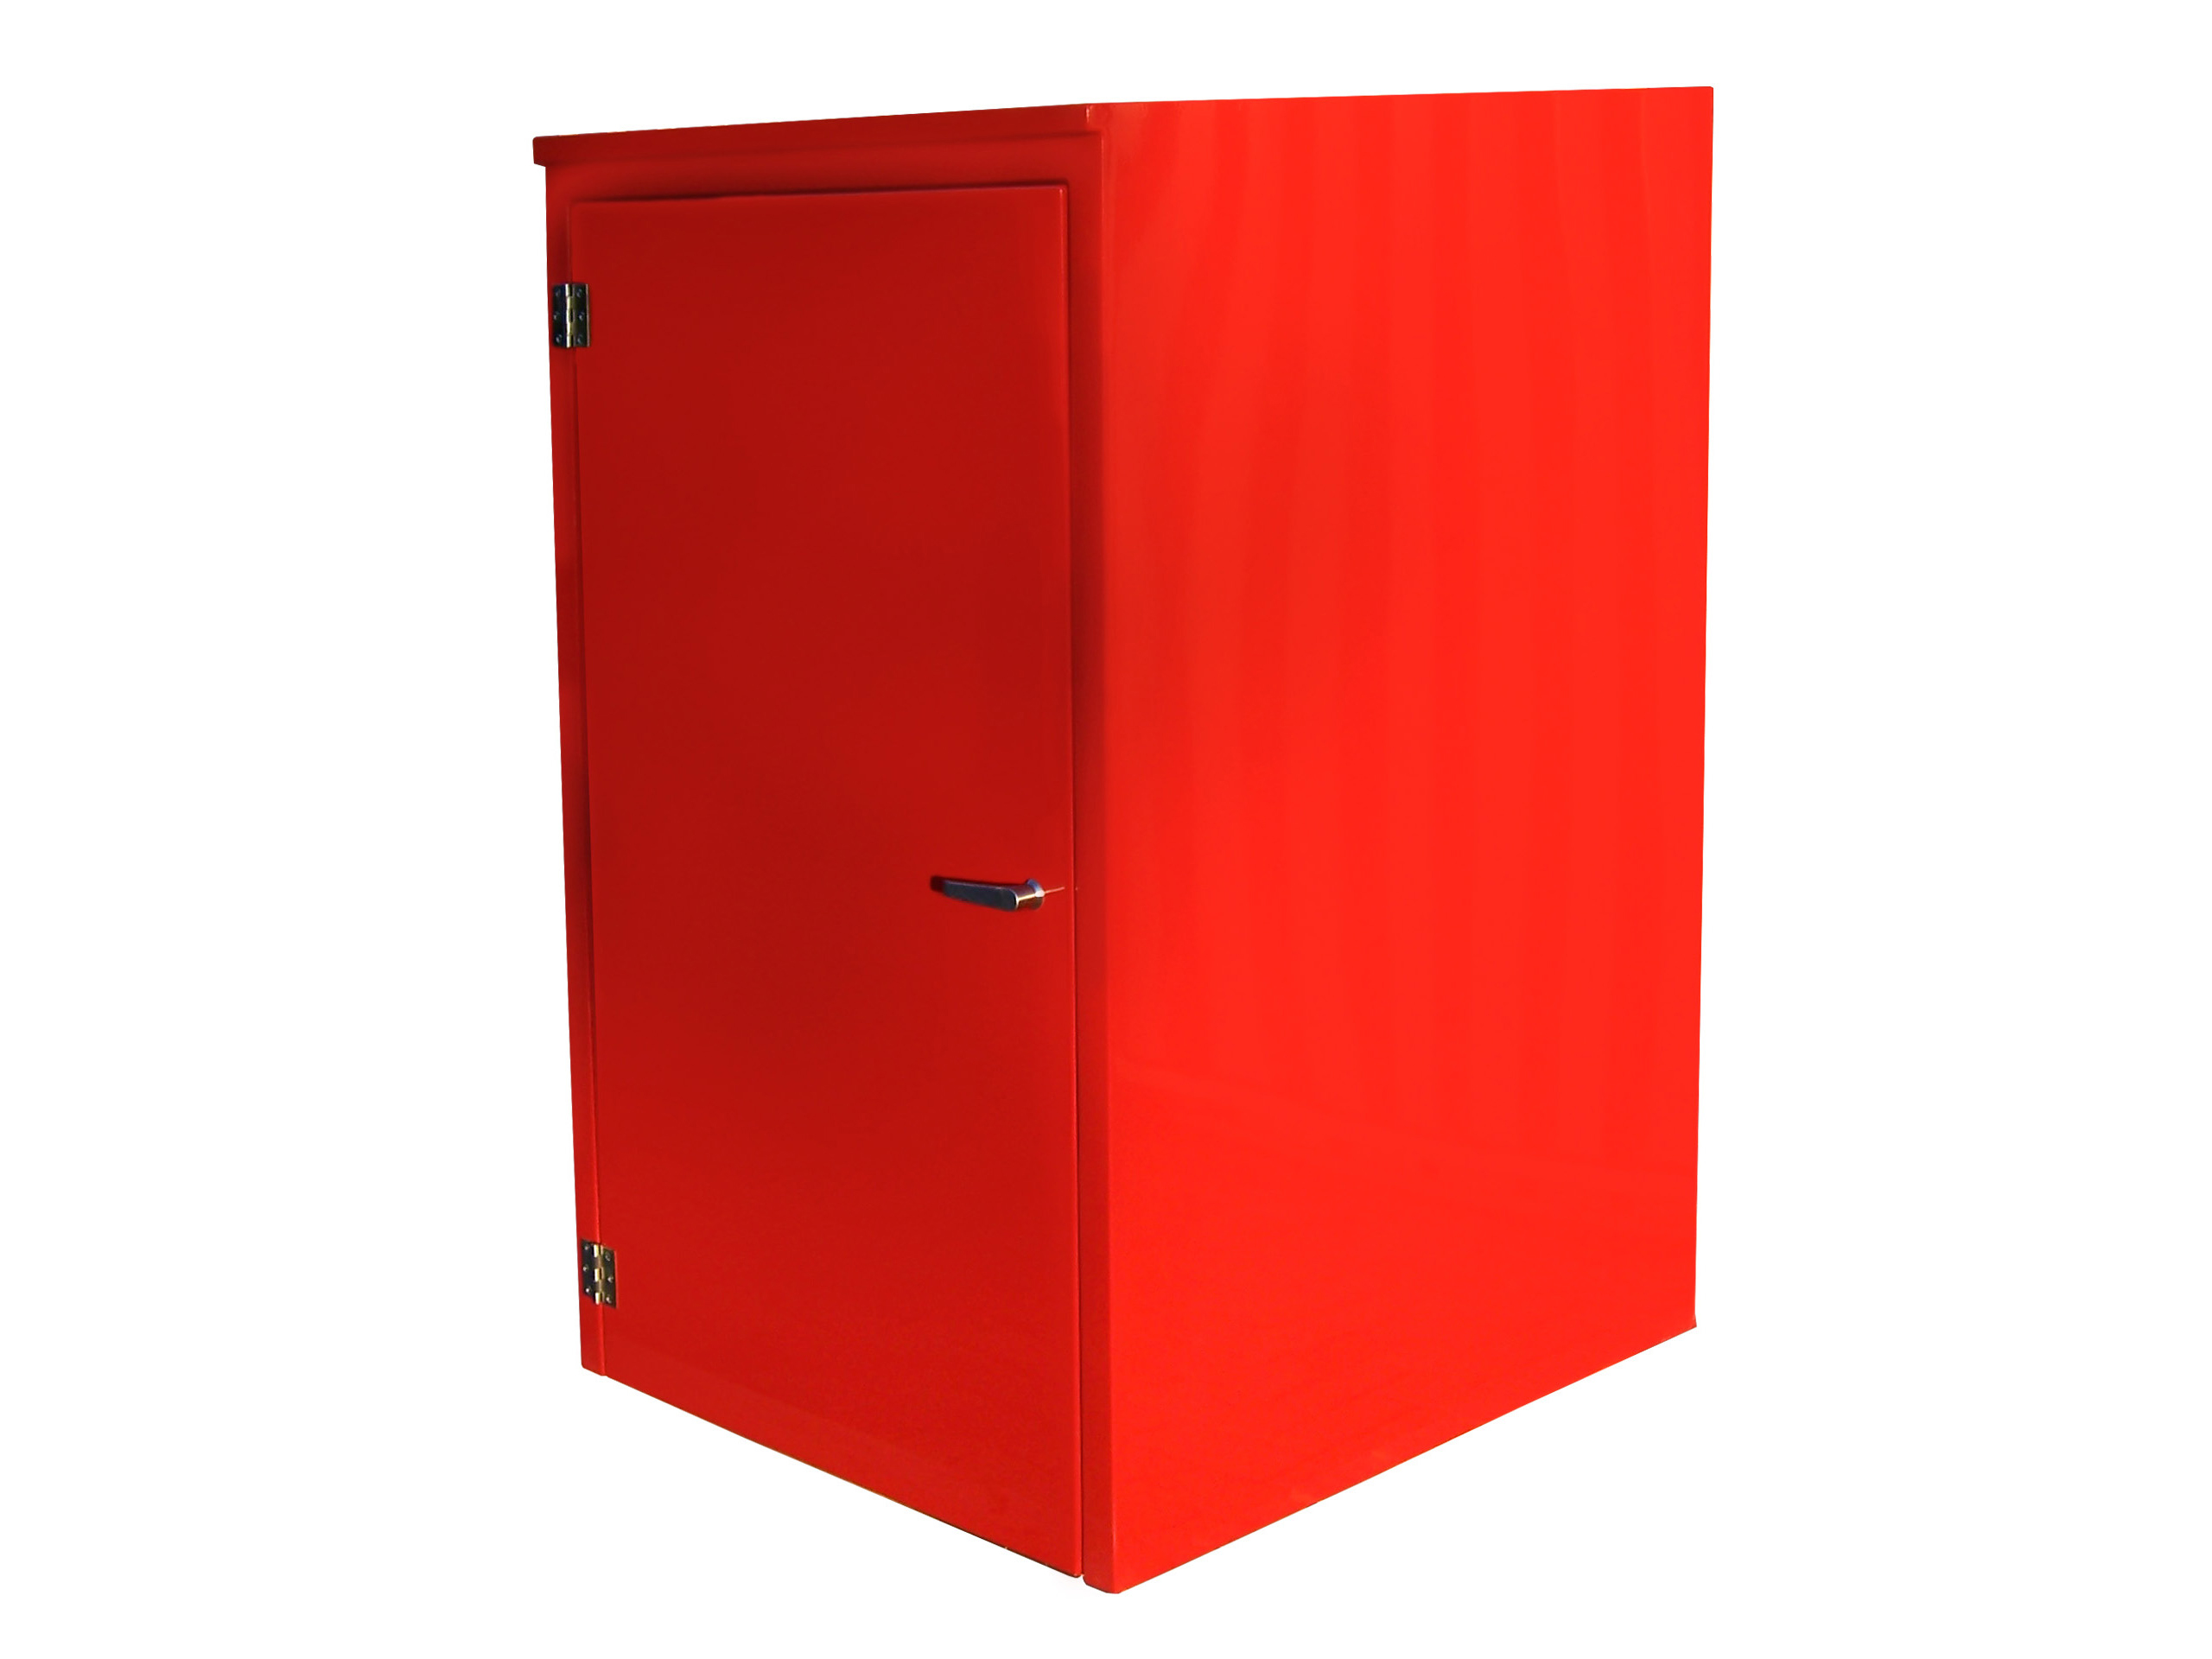 SG02075 GRP storage cabinet: DMO-07 Dräger Marine & Offshore cabinets are designed for tough offshore conditions. Manufactured from durable GRP material, these cabinets are rated to IP56, certified by Lloyds. All cabinets are manufactured with stainless steel locks and hinges. The cabinets can be configured to suit different storage requirements.